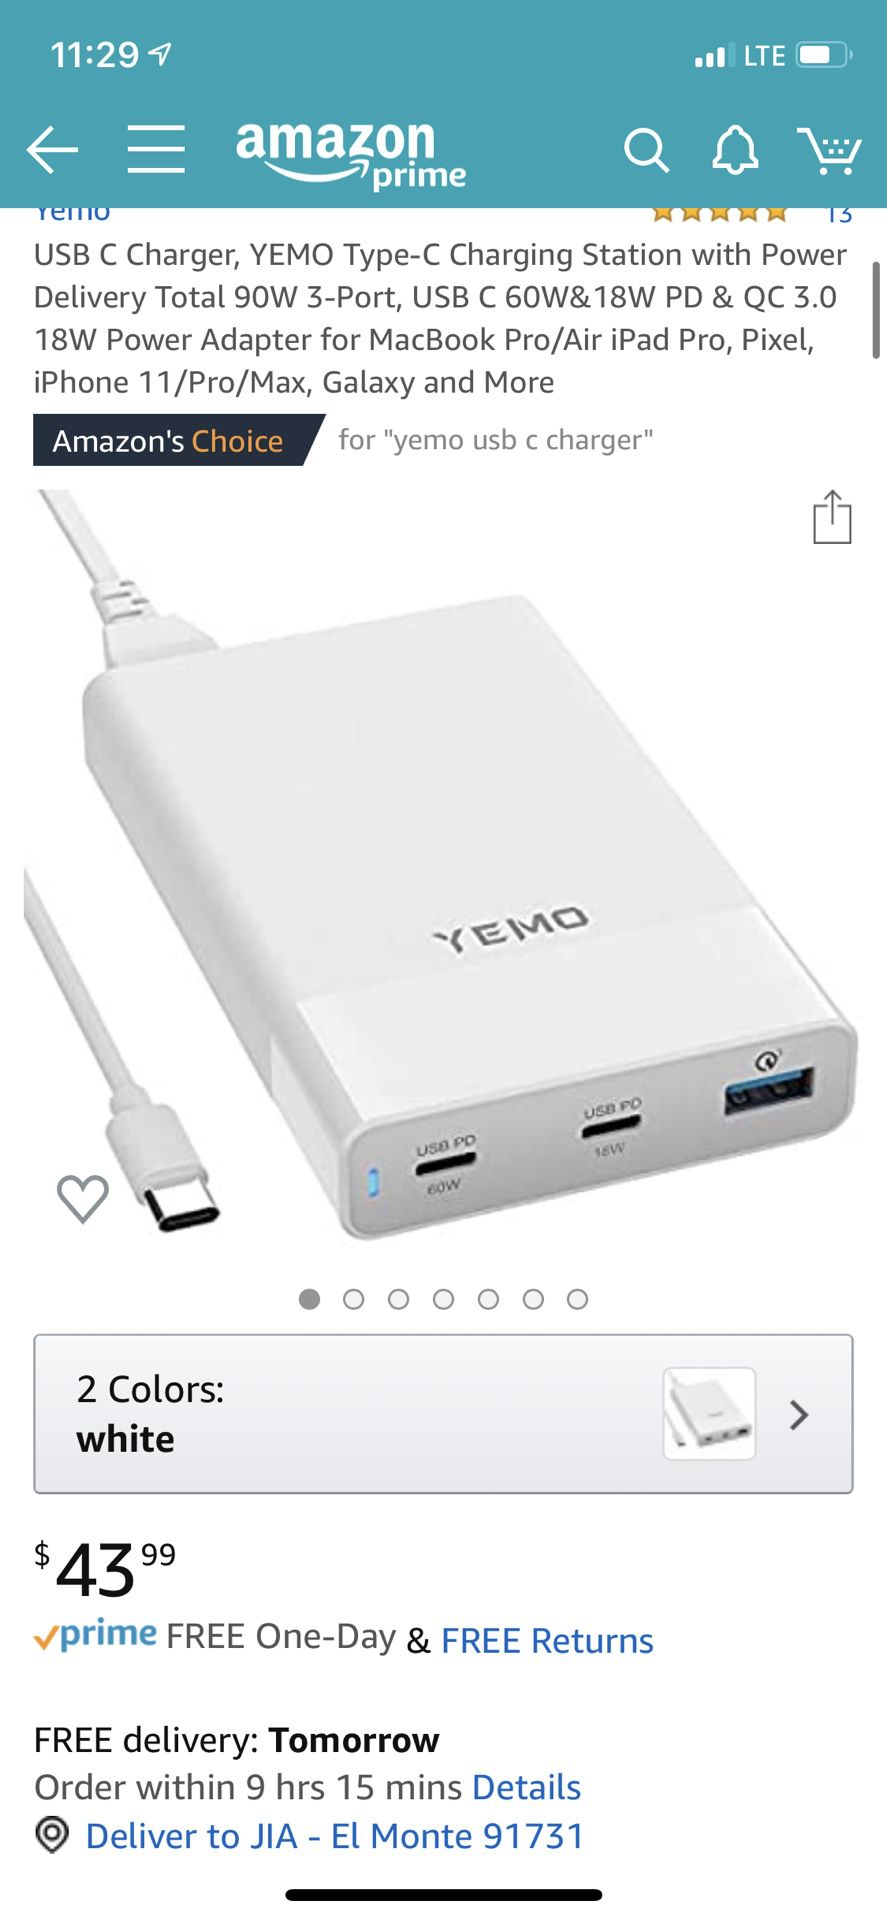 USB C Charger, YEMO Type-C Charging Station with Power Delivery Total 90W 3-Port, USB C 60W&18W PD & QC 3.0 18W Power Adapter for MacBook Pro/Air iPa